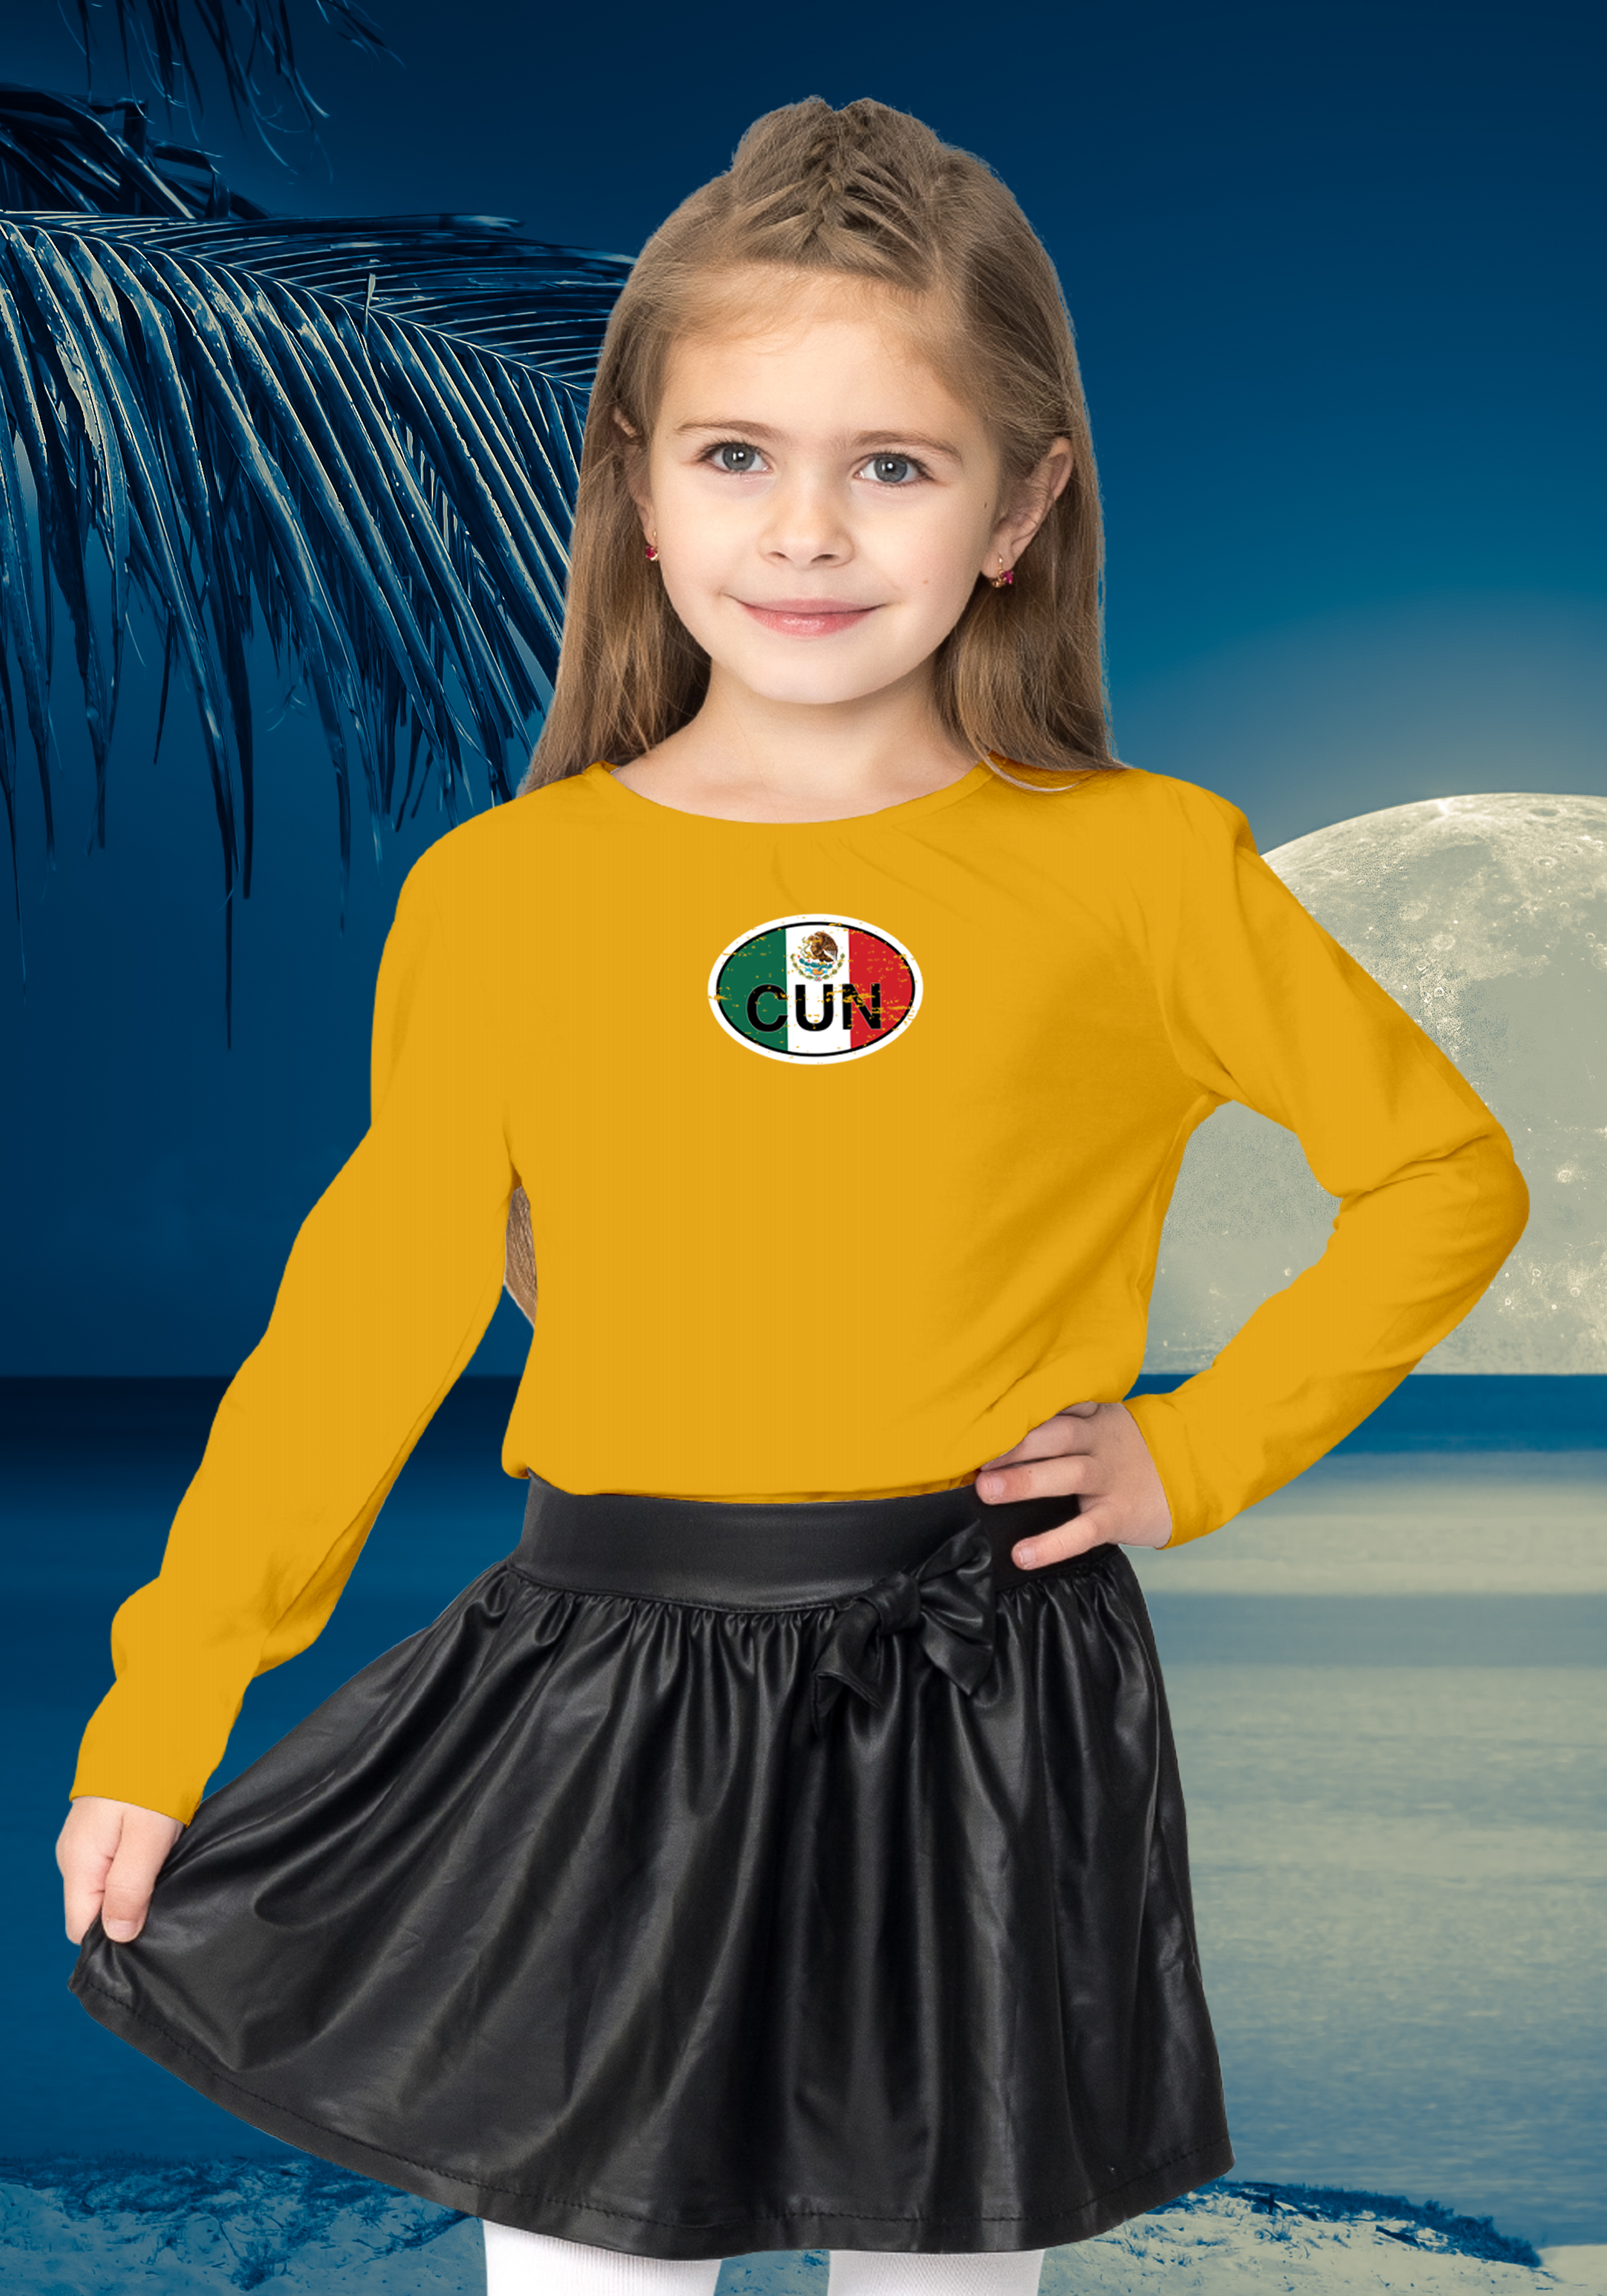 Cancun Youth Flag Long Sleeve T-Shirts - My Destination Location